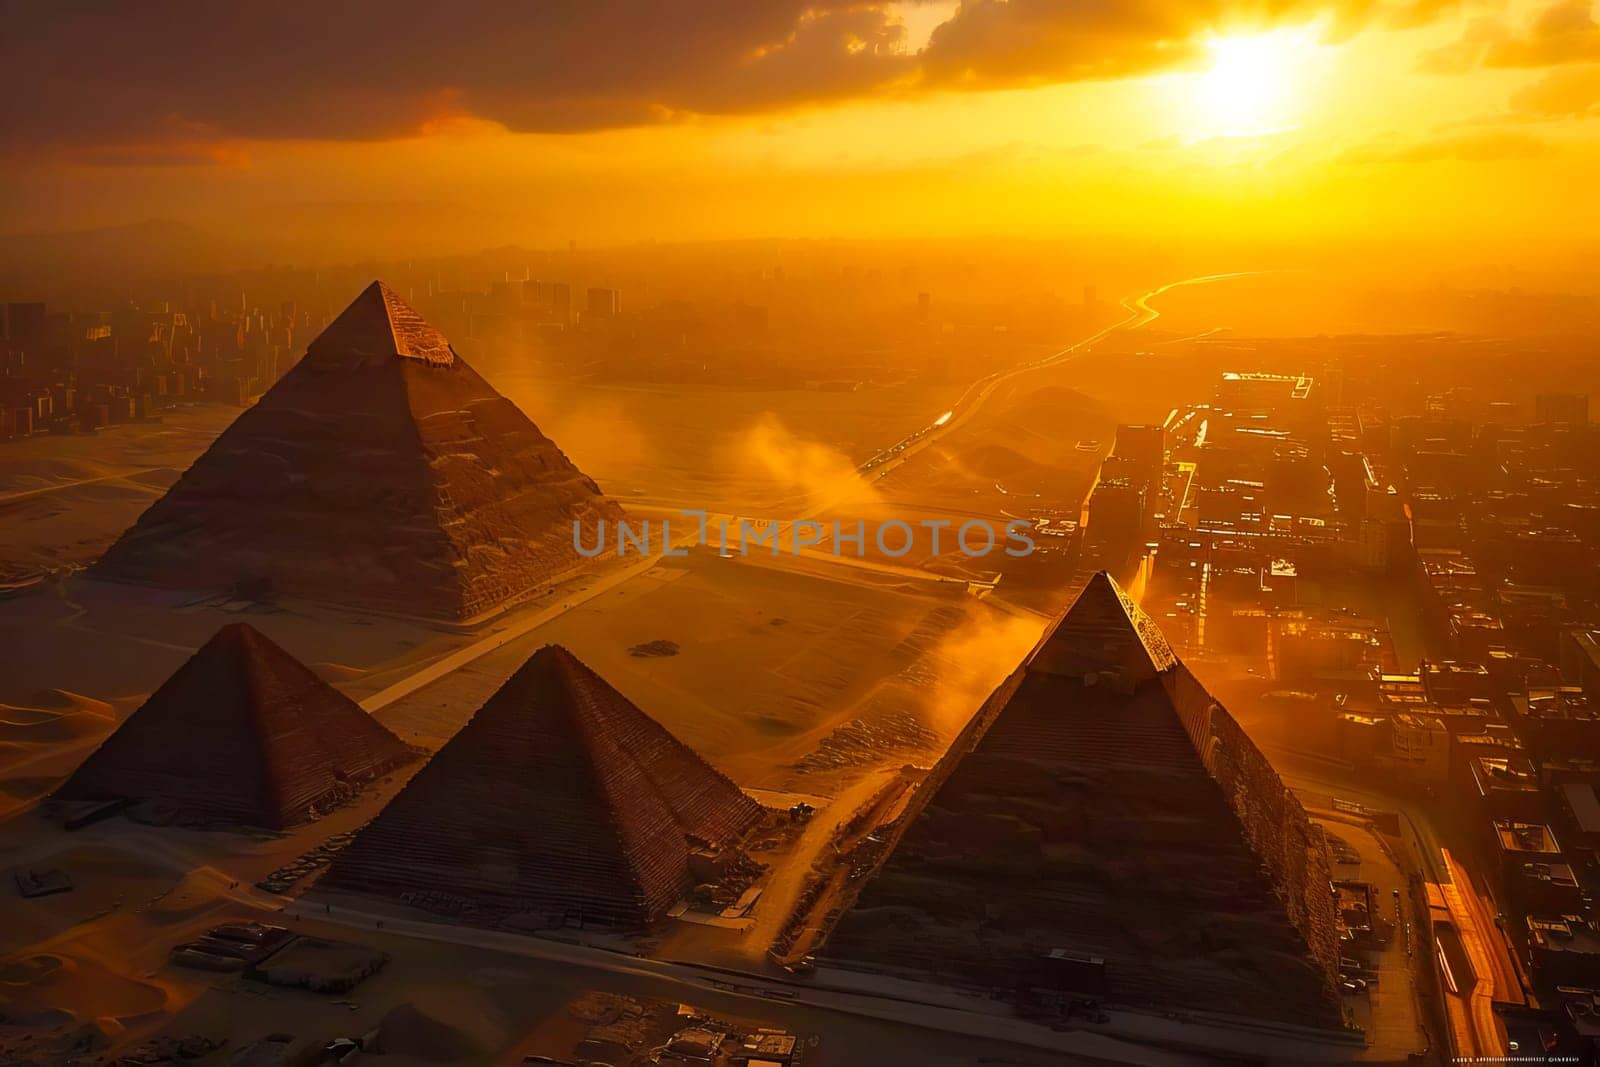 The iconic Pyramids of Giza captured from above during a picturesque sunset. by vladimka